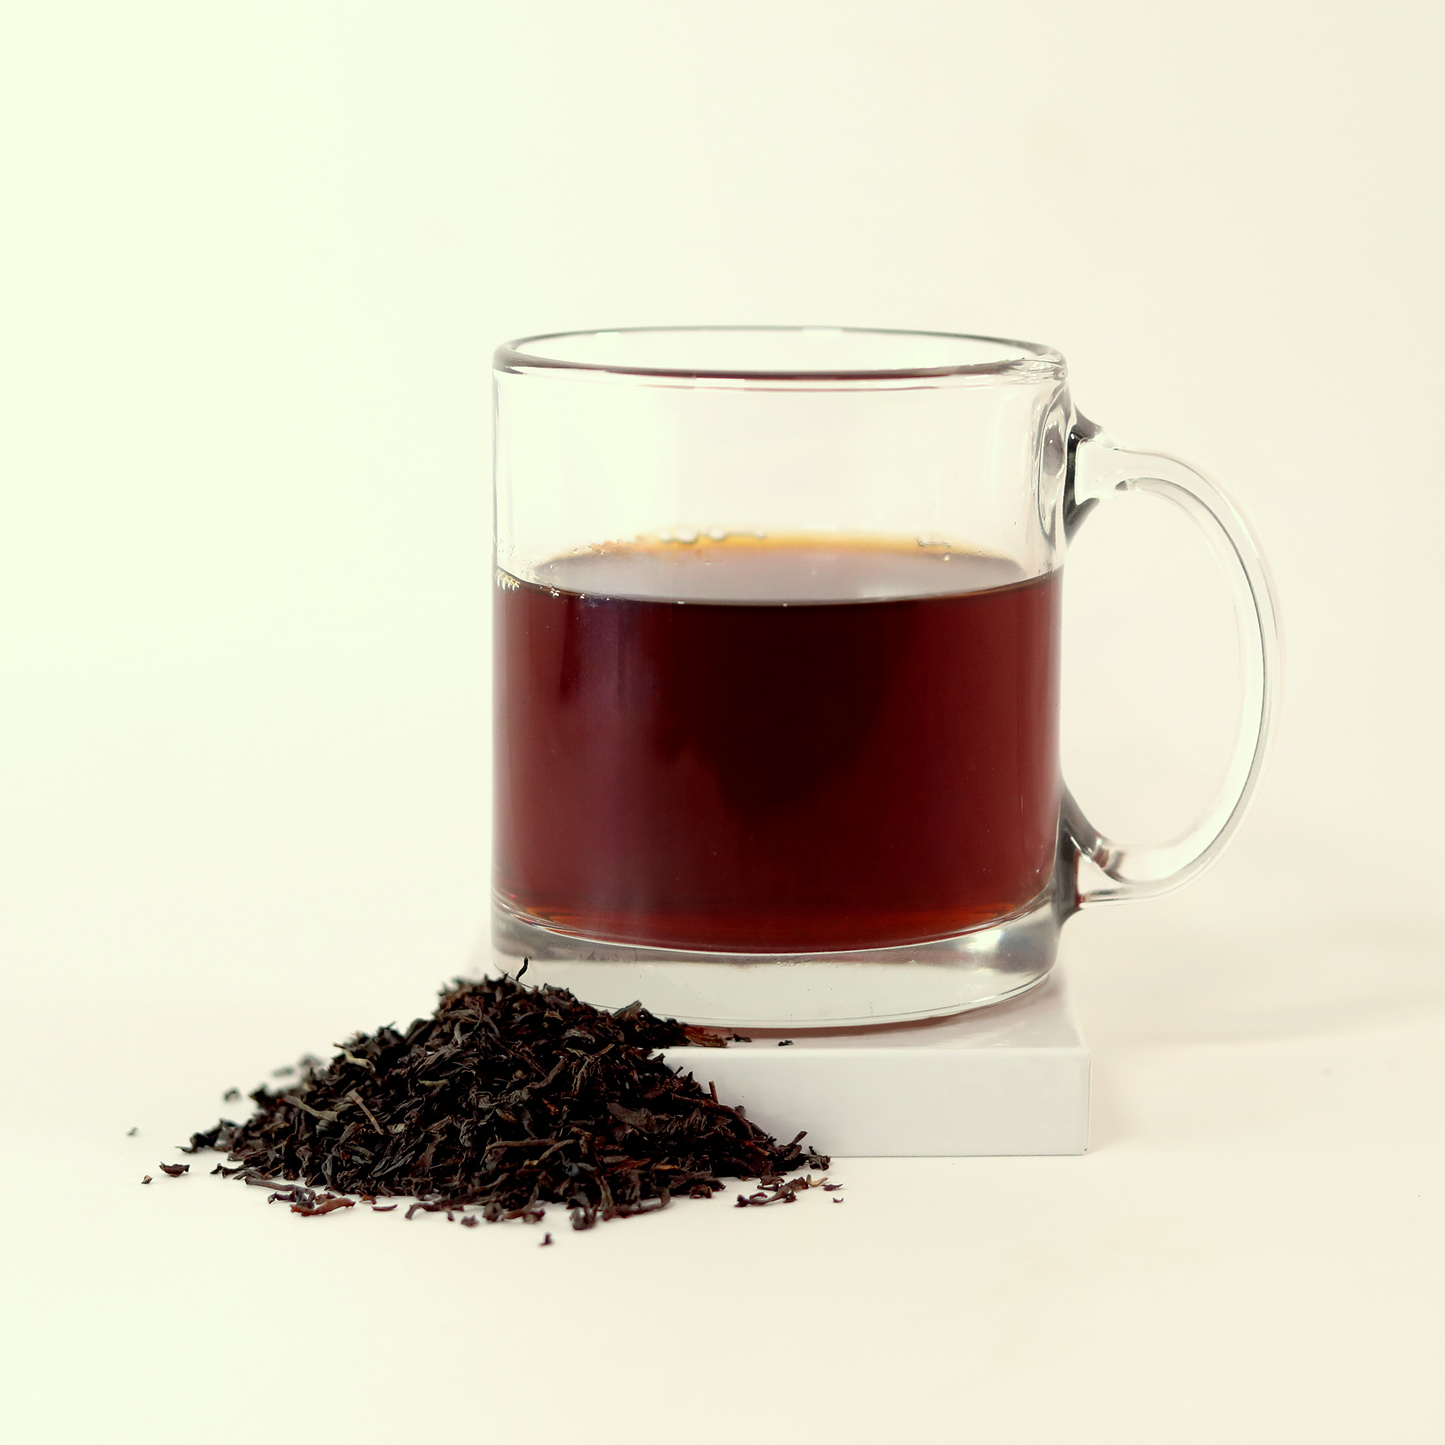  A clear glass mug filled with dark reddish-brown tea - Bright Star Breakfast Blend -  next to a small pile of dried tea leaves. A Good Store product.